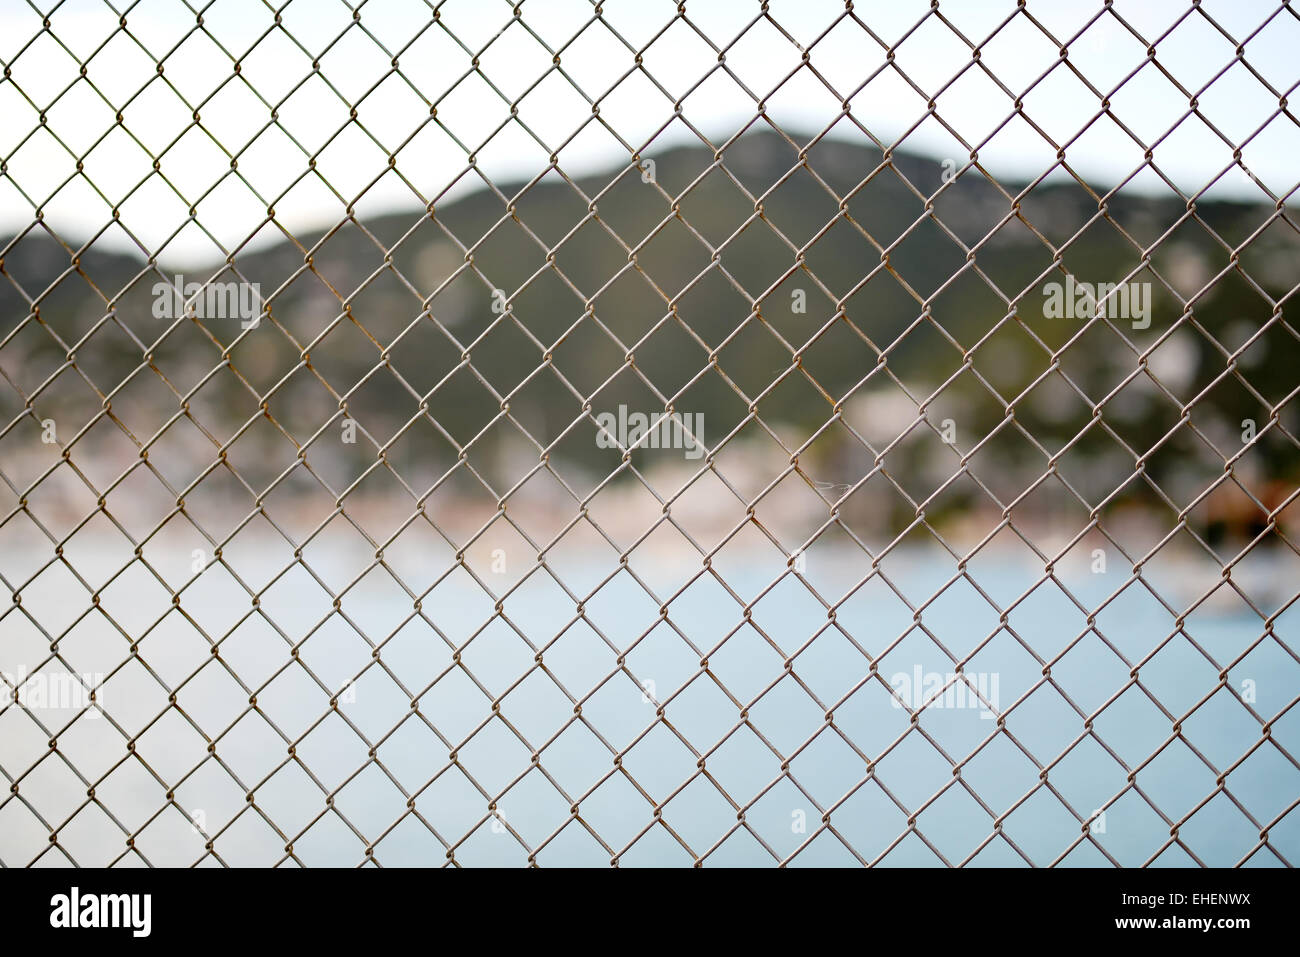 Metal mesh wire fence Stock Photo